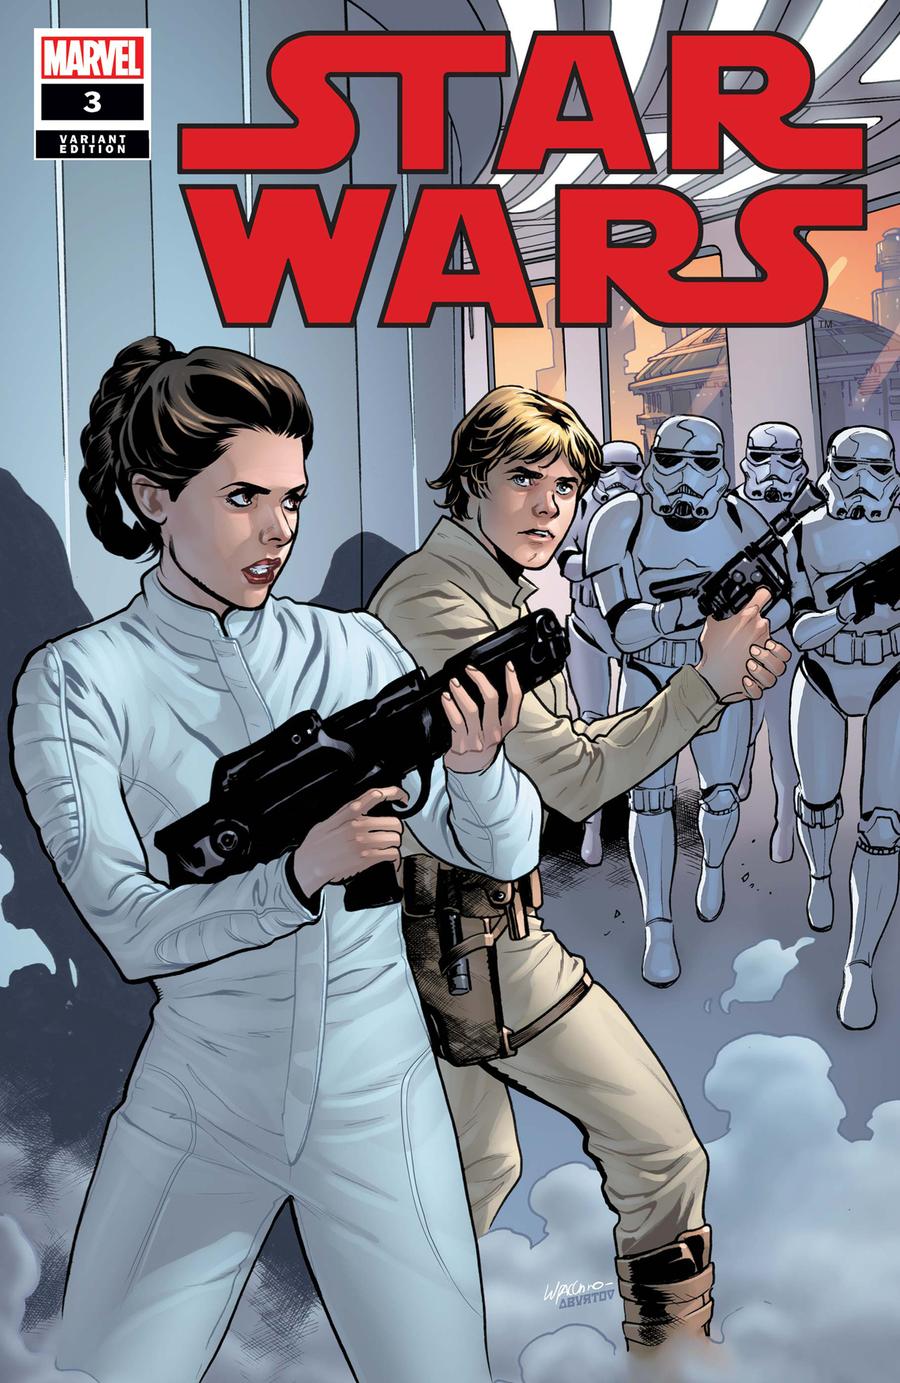 Star Wars Vol 5 #3 Cover C Incentive Emanuela Lupacchino Variant Cover